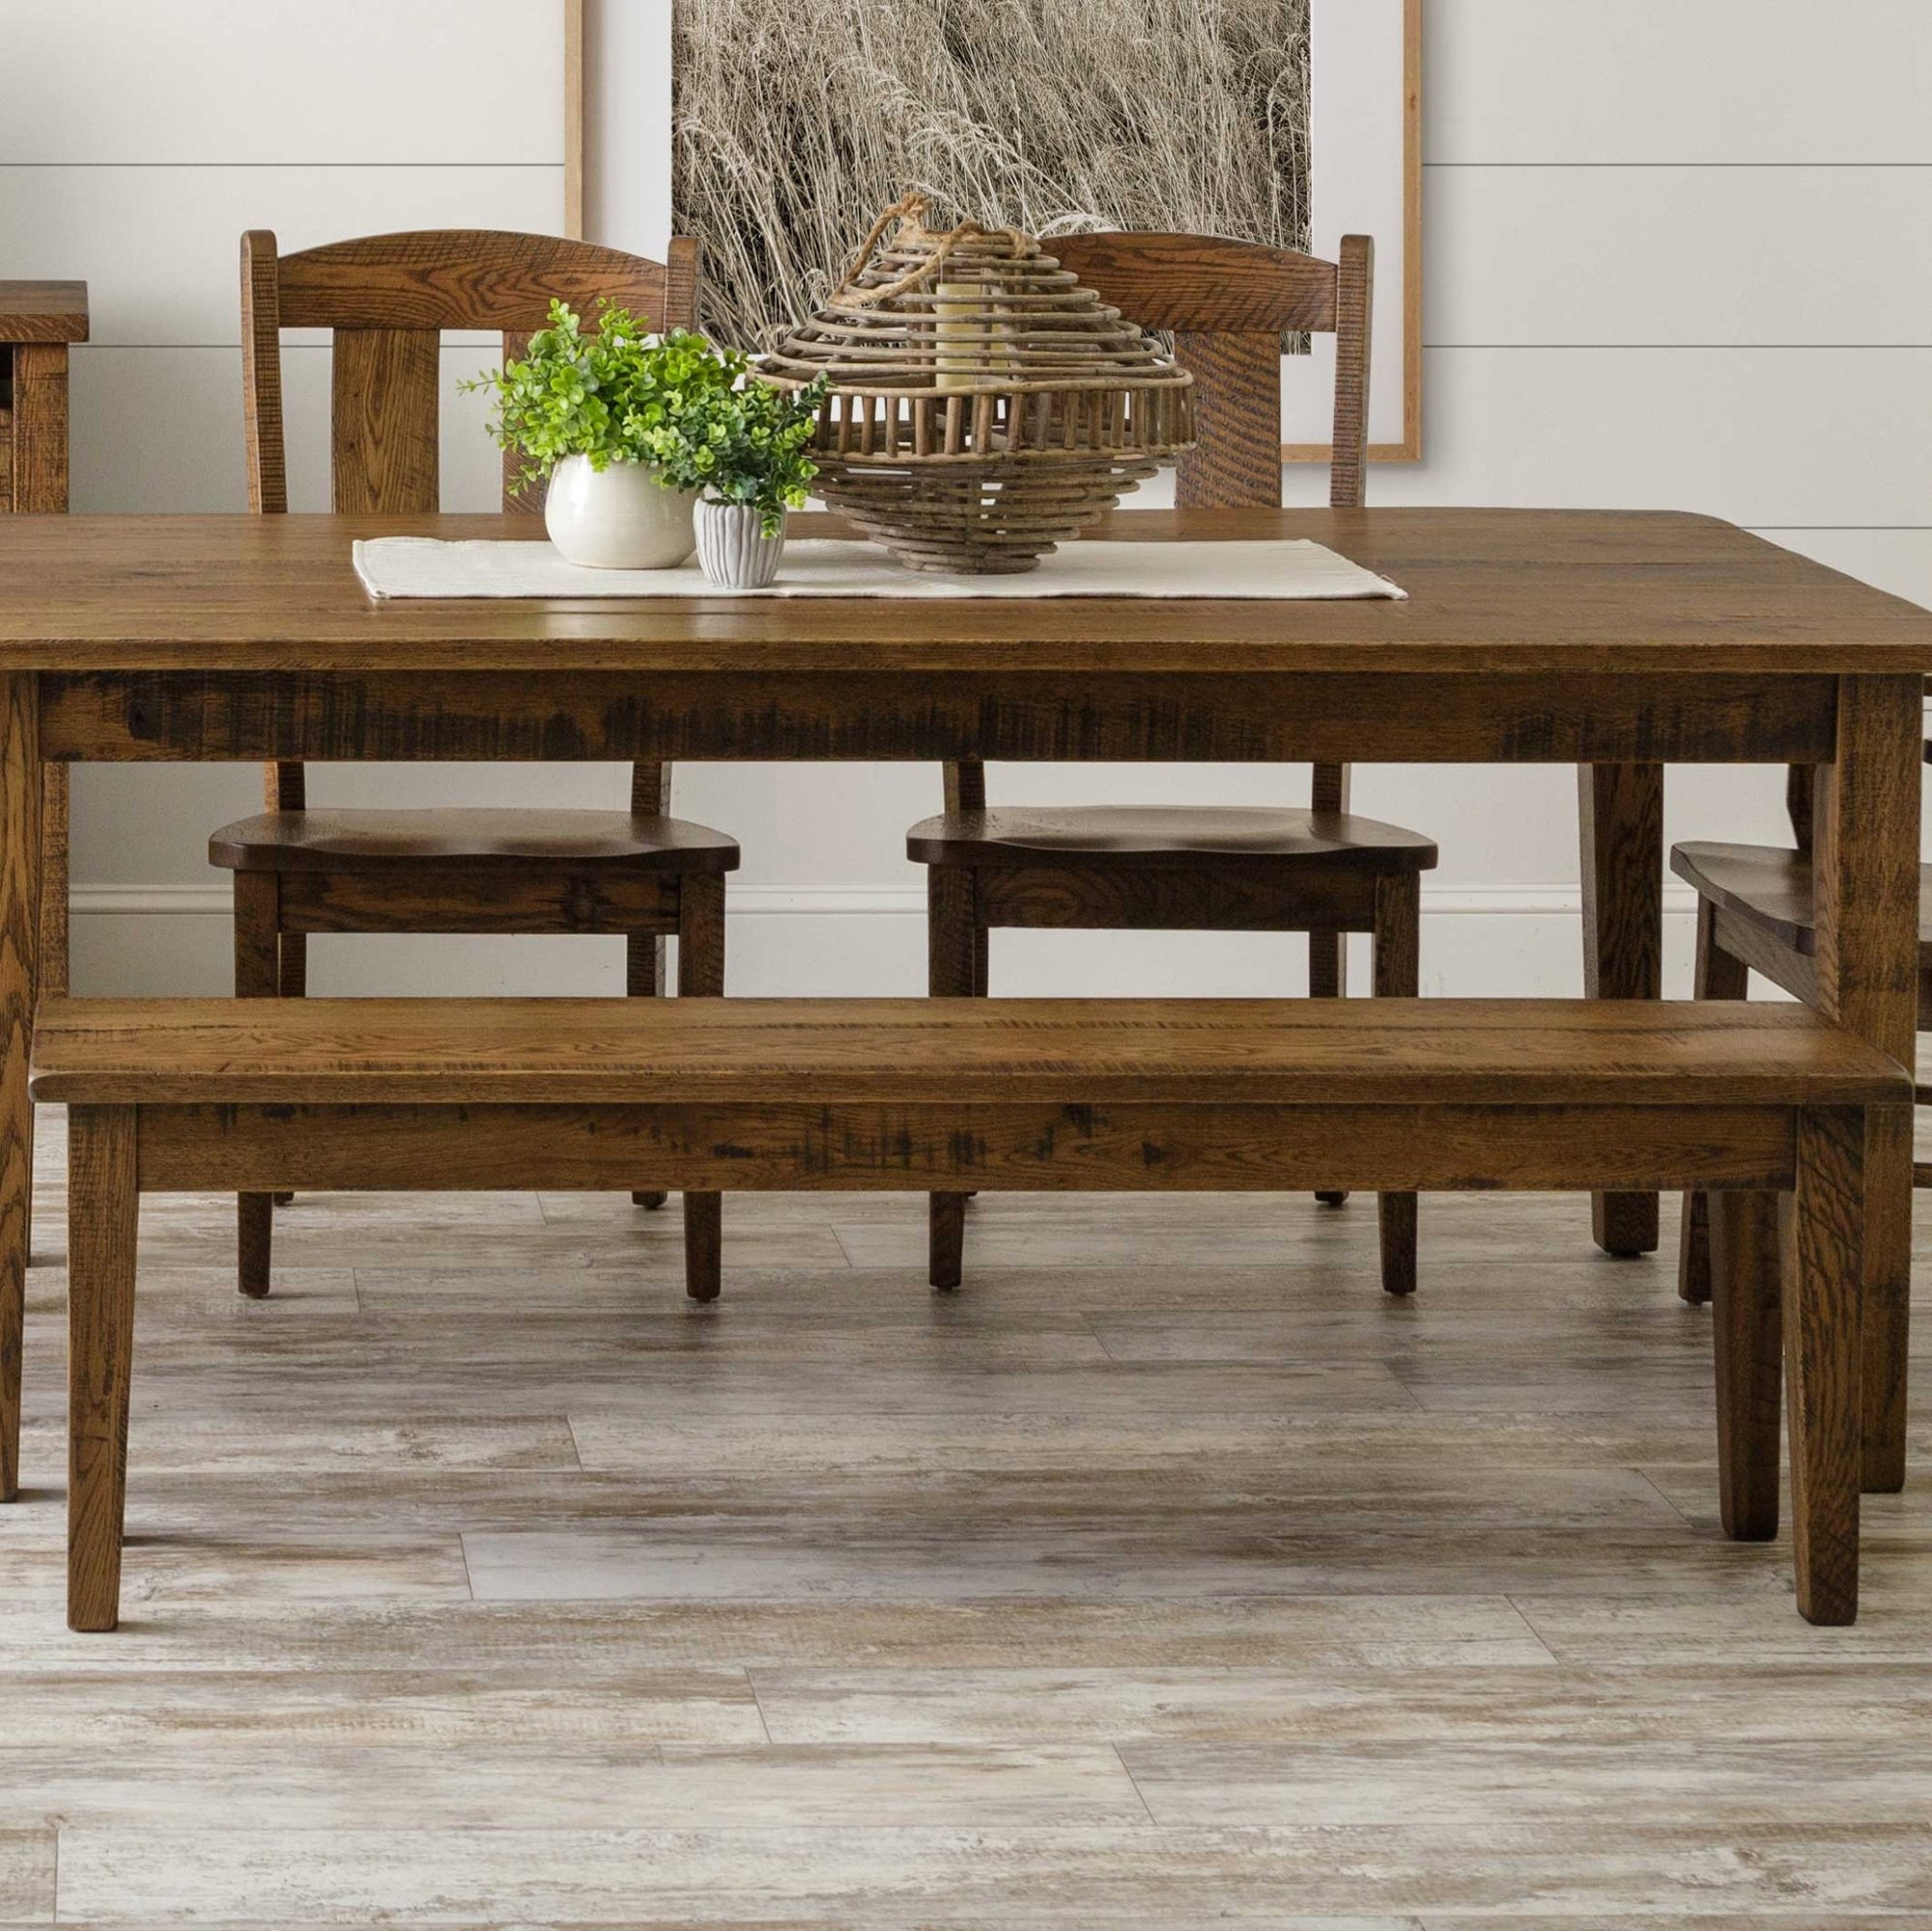 Amish Shaker Solid Wood Dining Room Bench - snyders.furniture